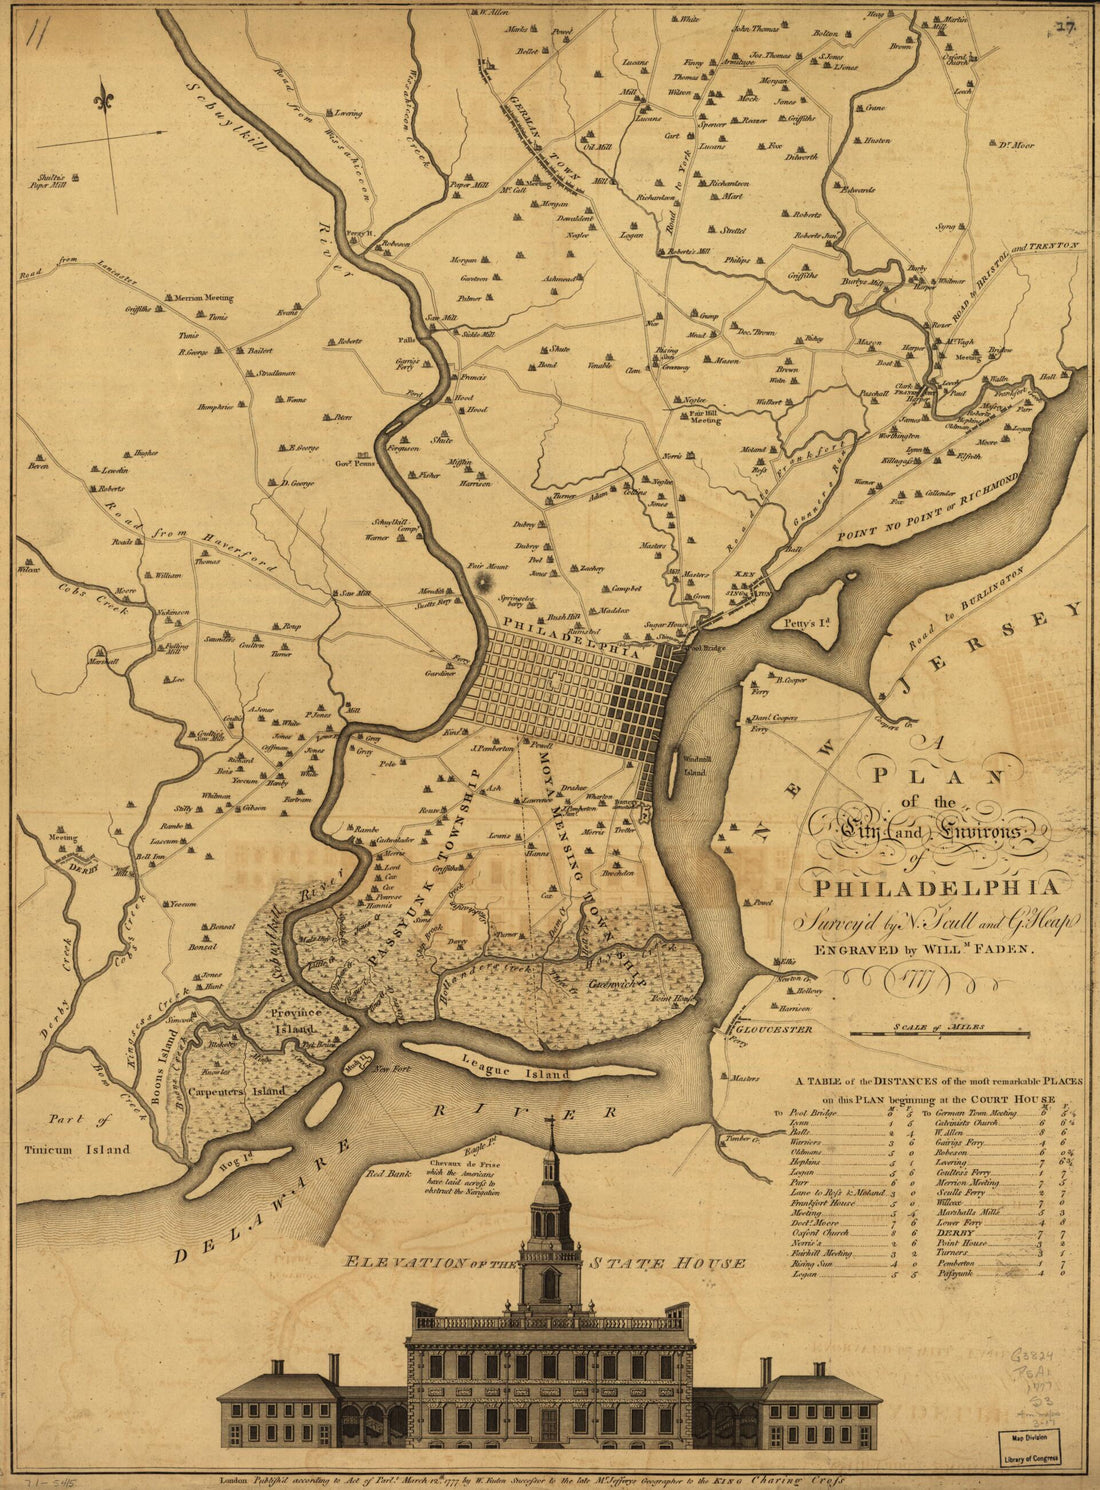 This old map of A Plan of the City and Environs of Philadelphia from 1777 was created by William Faden, George Heap, Nicholas Scull in 1777